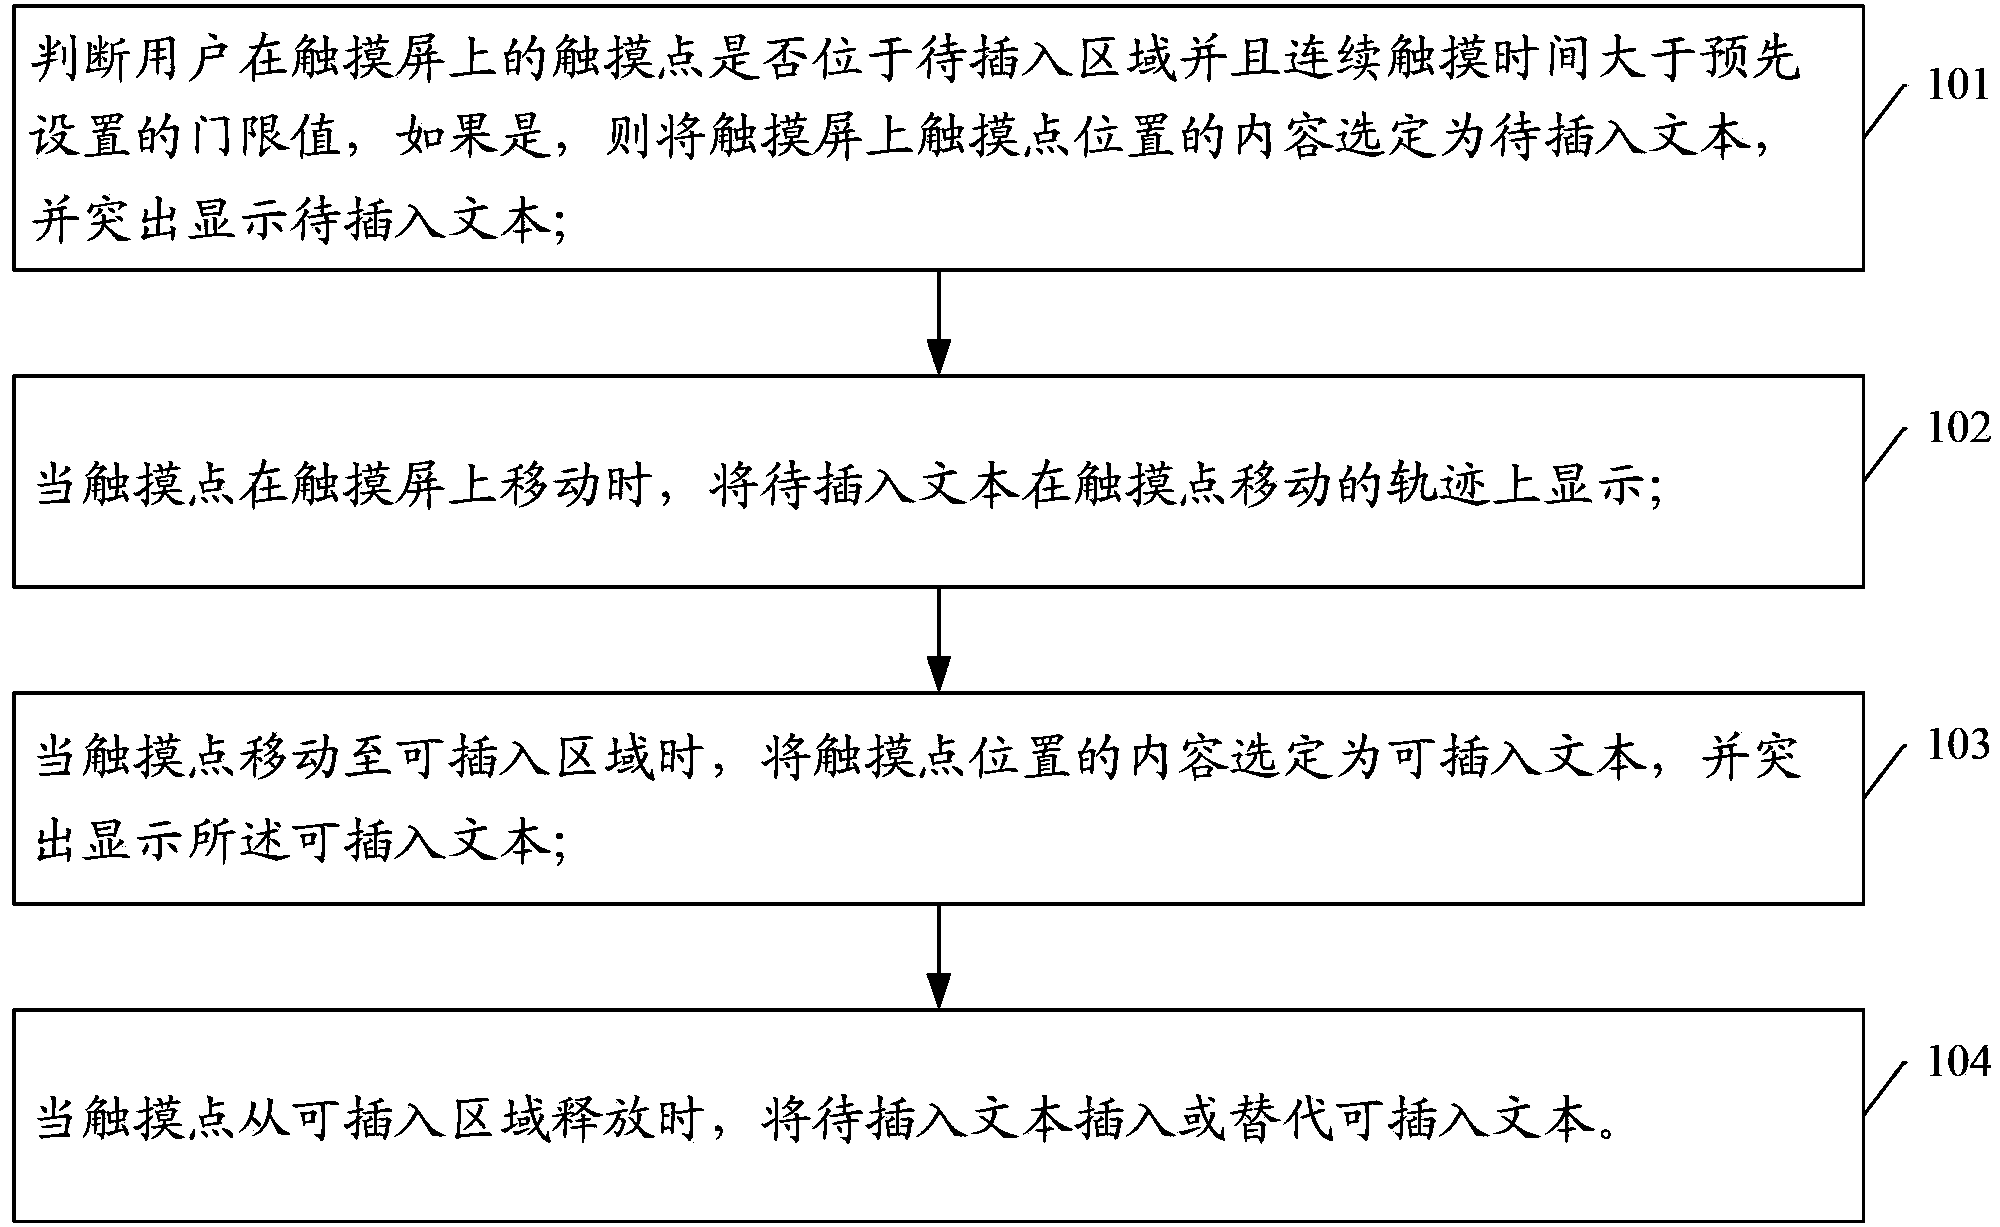 Method and device for realizing text editing on touch screen interface